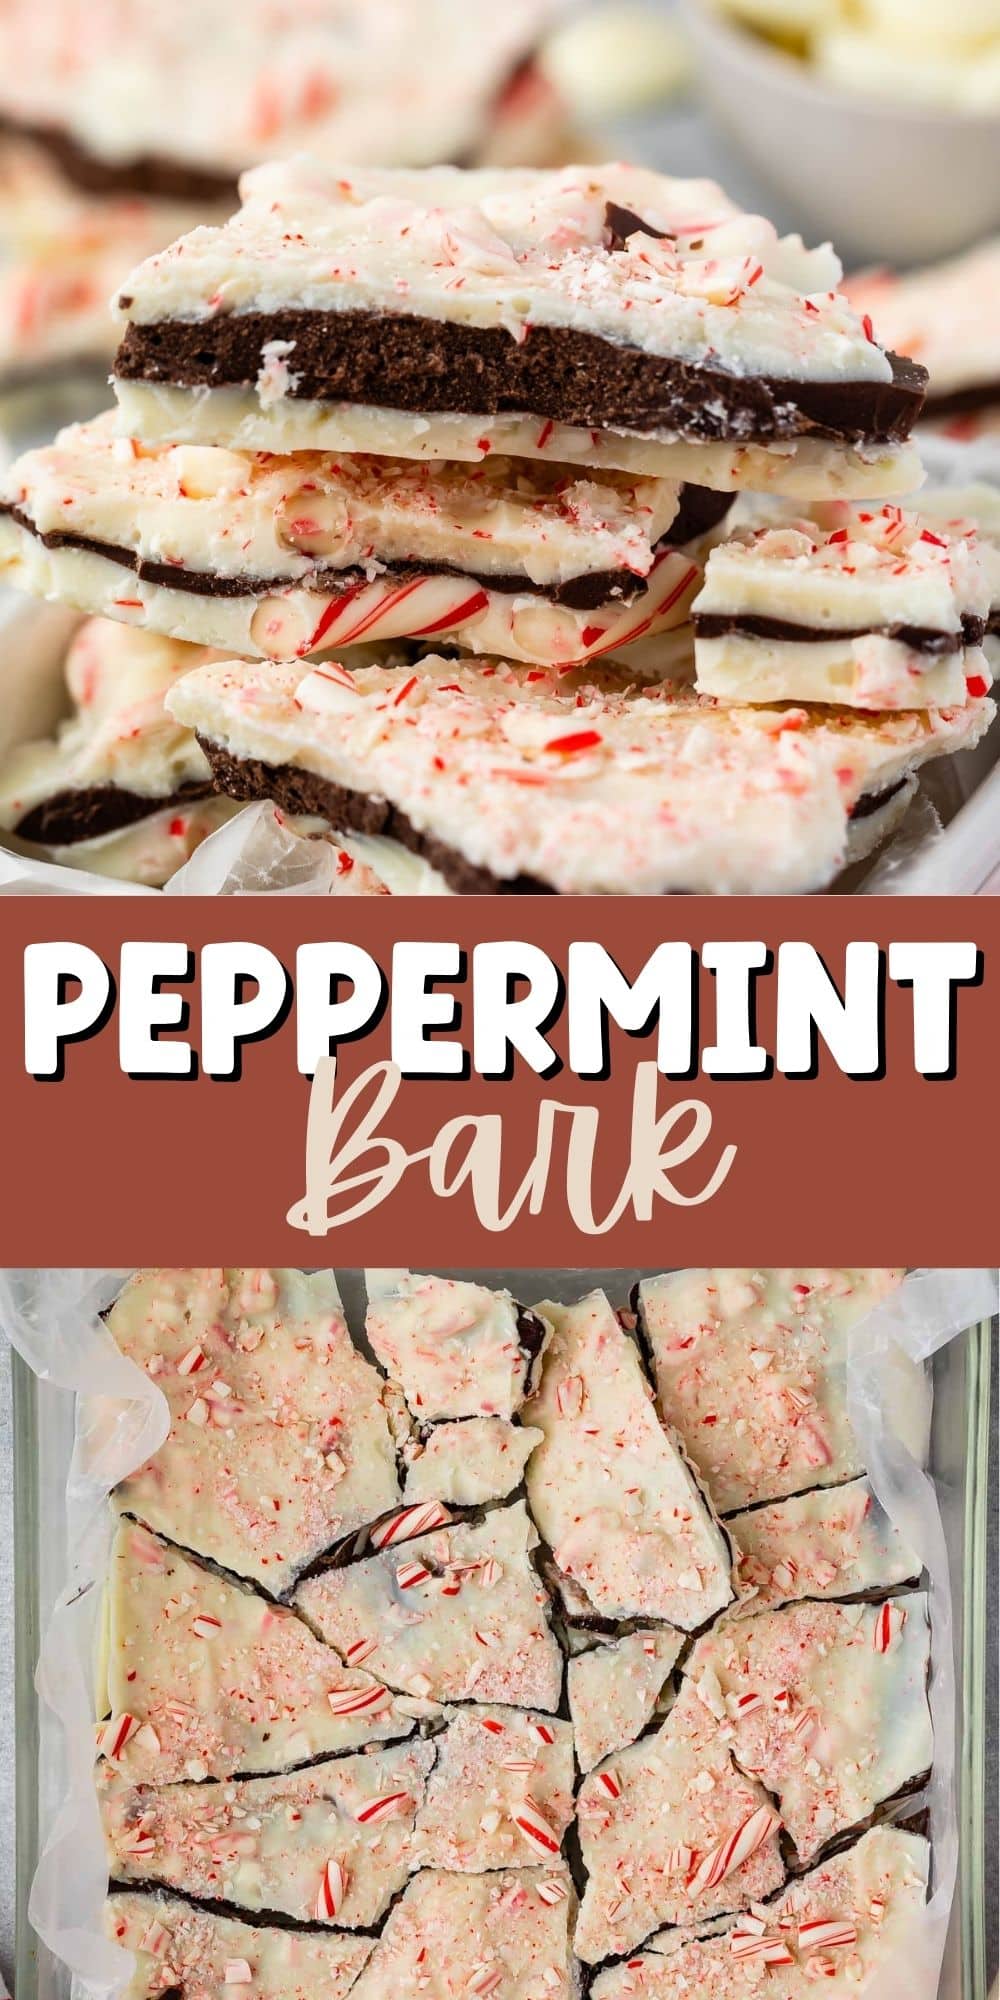 two photos of layered chocolate bark with crushed peppermint on top and words in the middle